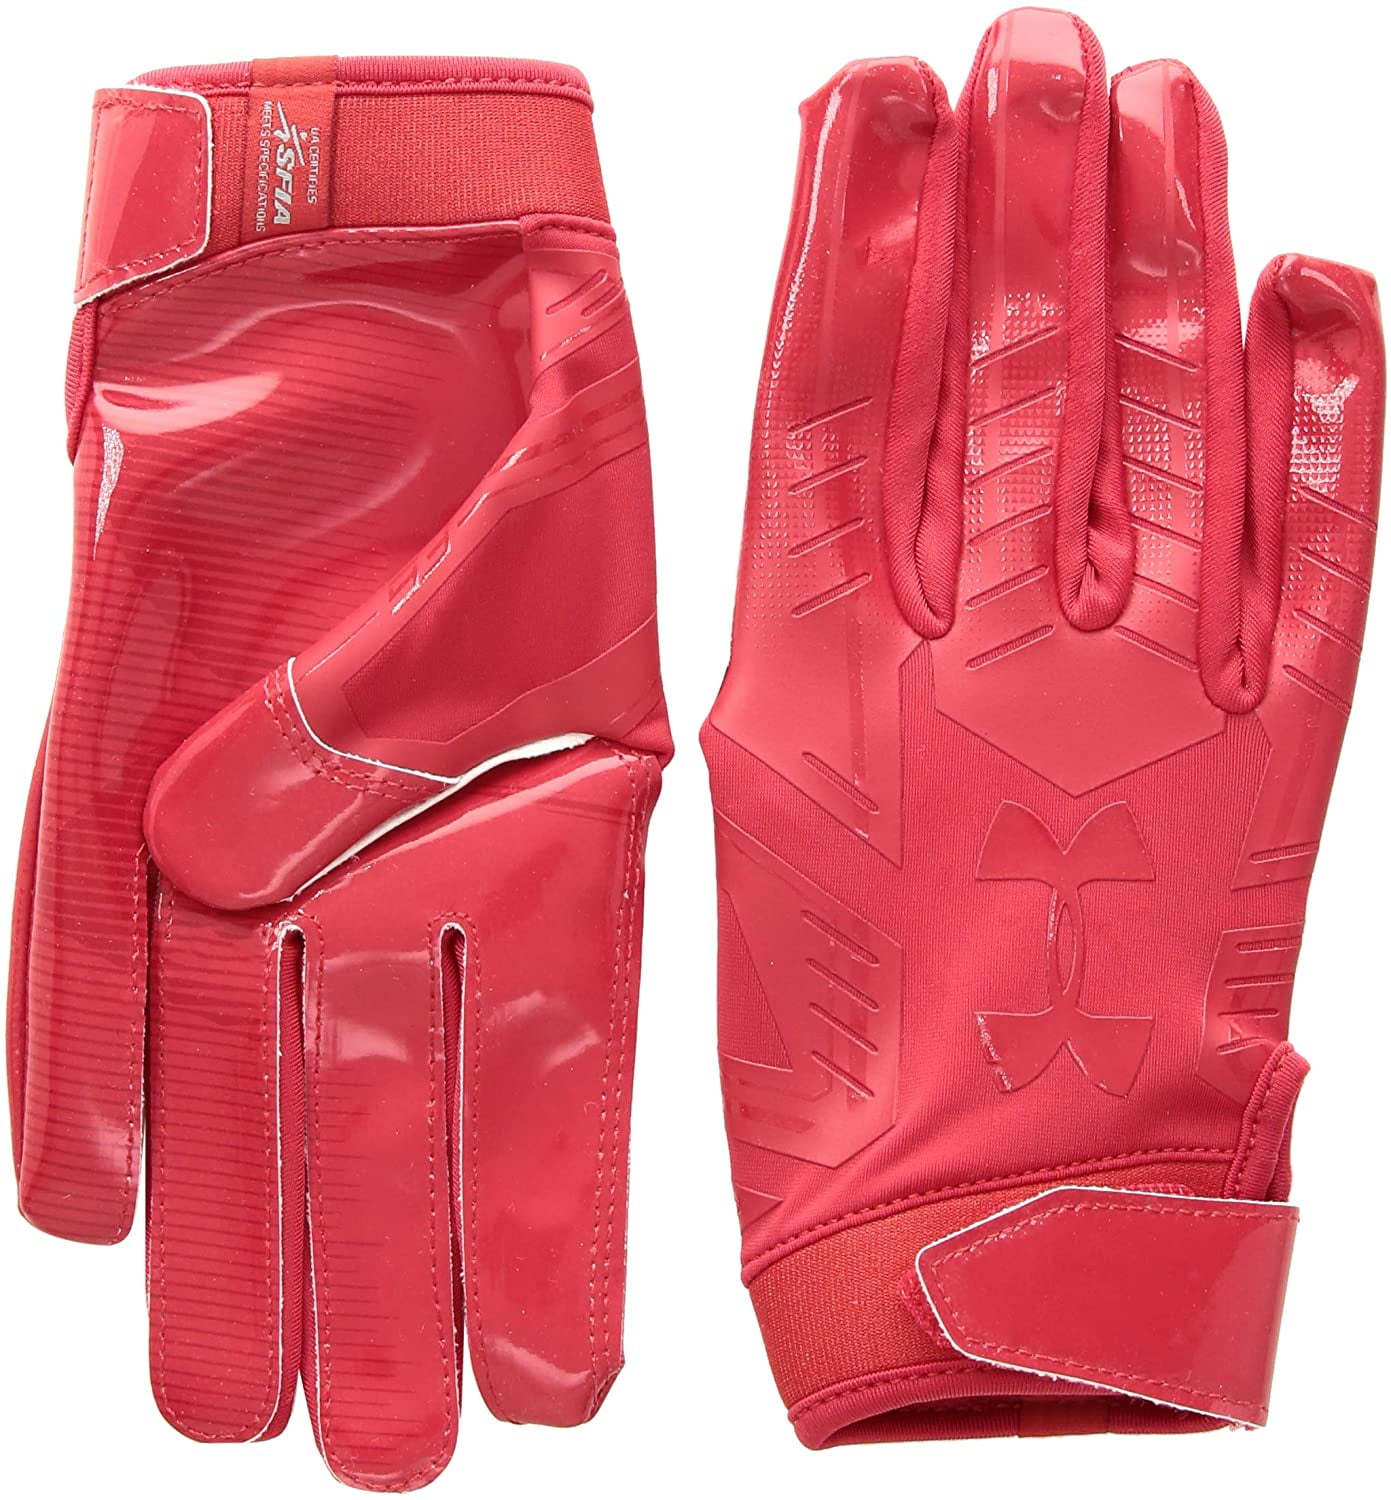 all red under armour football gloves